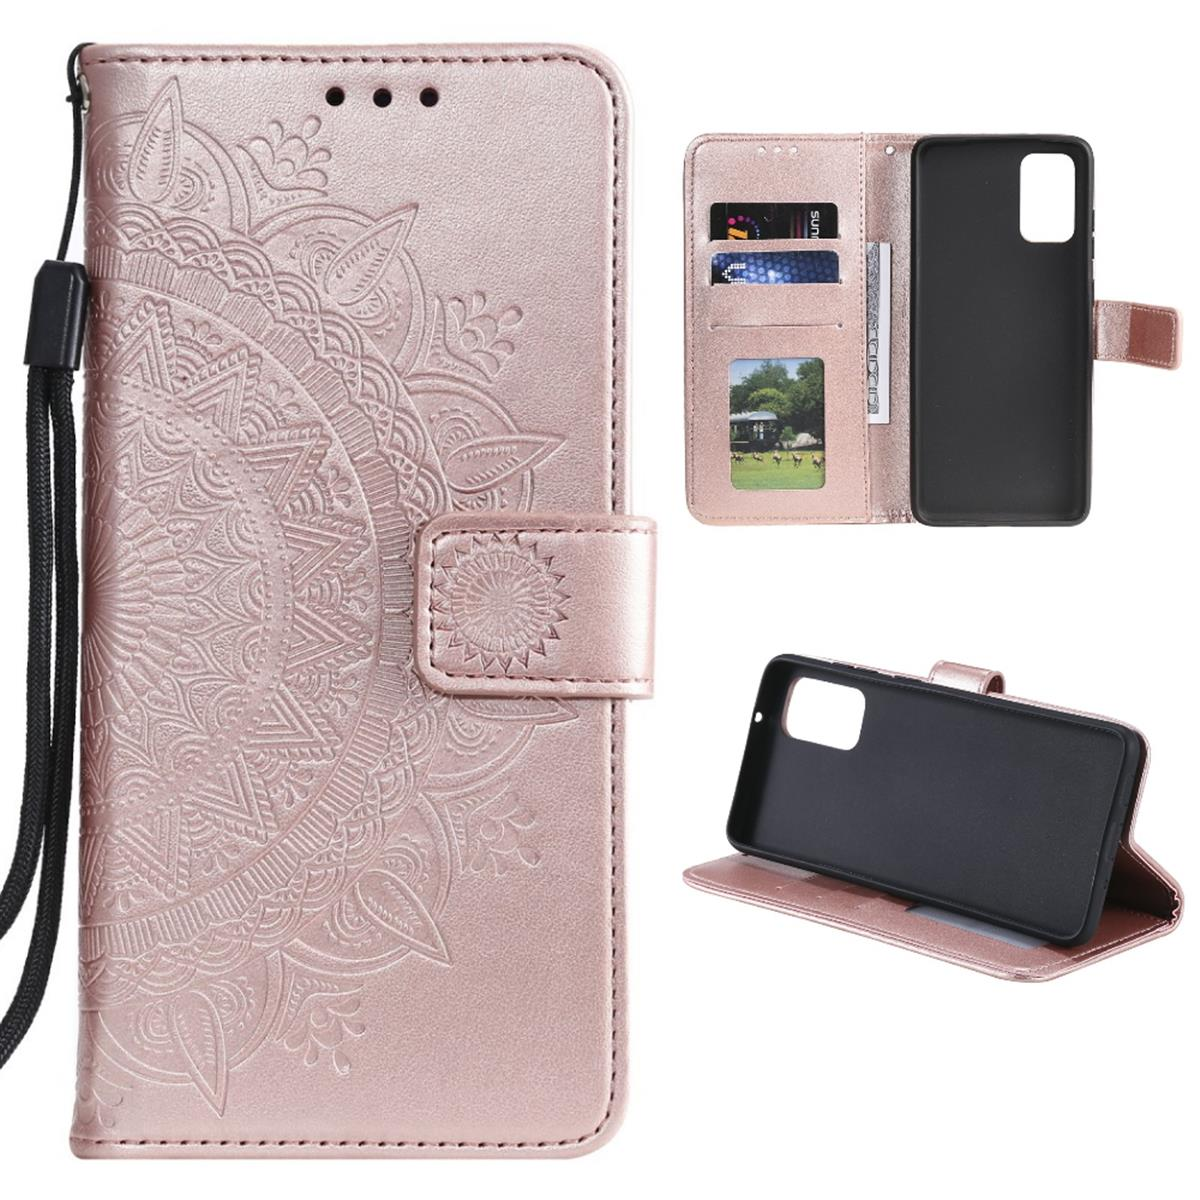 A52/A52 5G/A52s Klapphülle Bookcover, Roségold Samsung, Mandala Galaxy COVERKINGZ mit Muster, 5G,